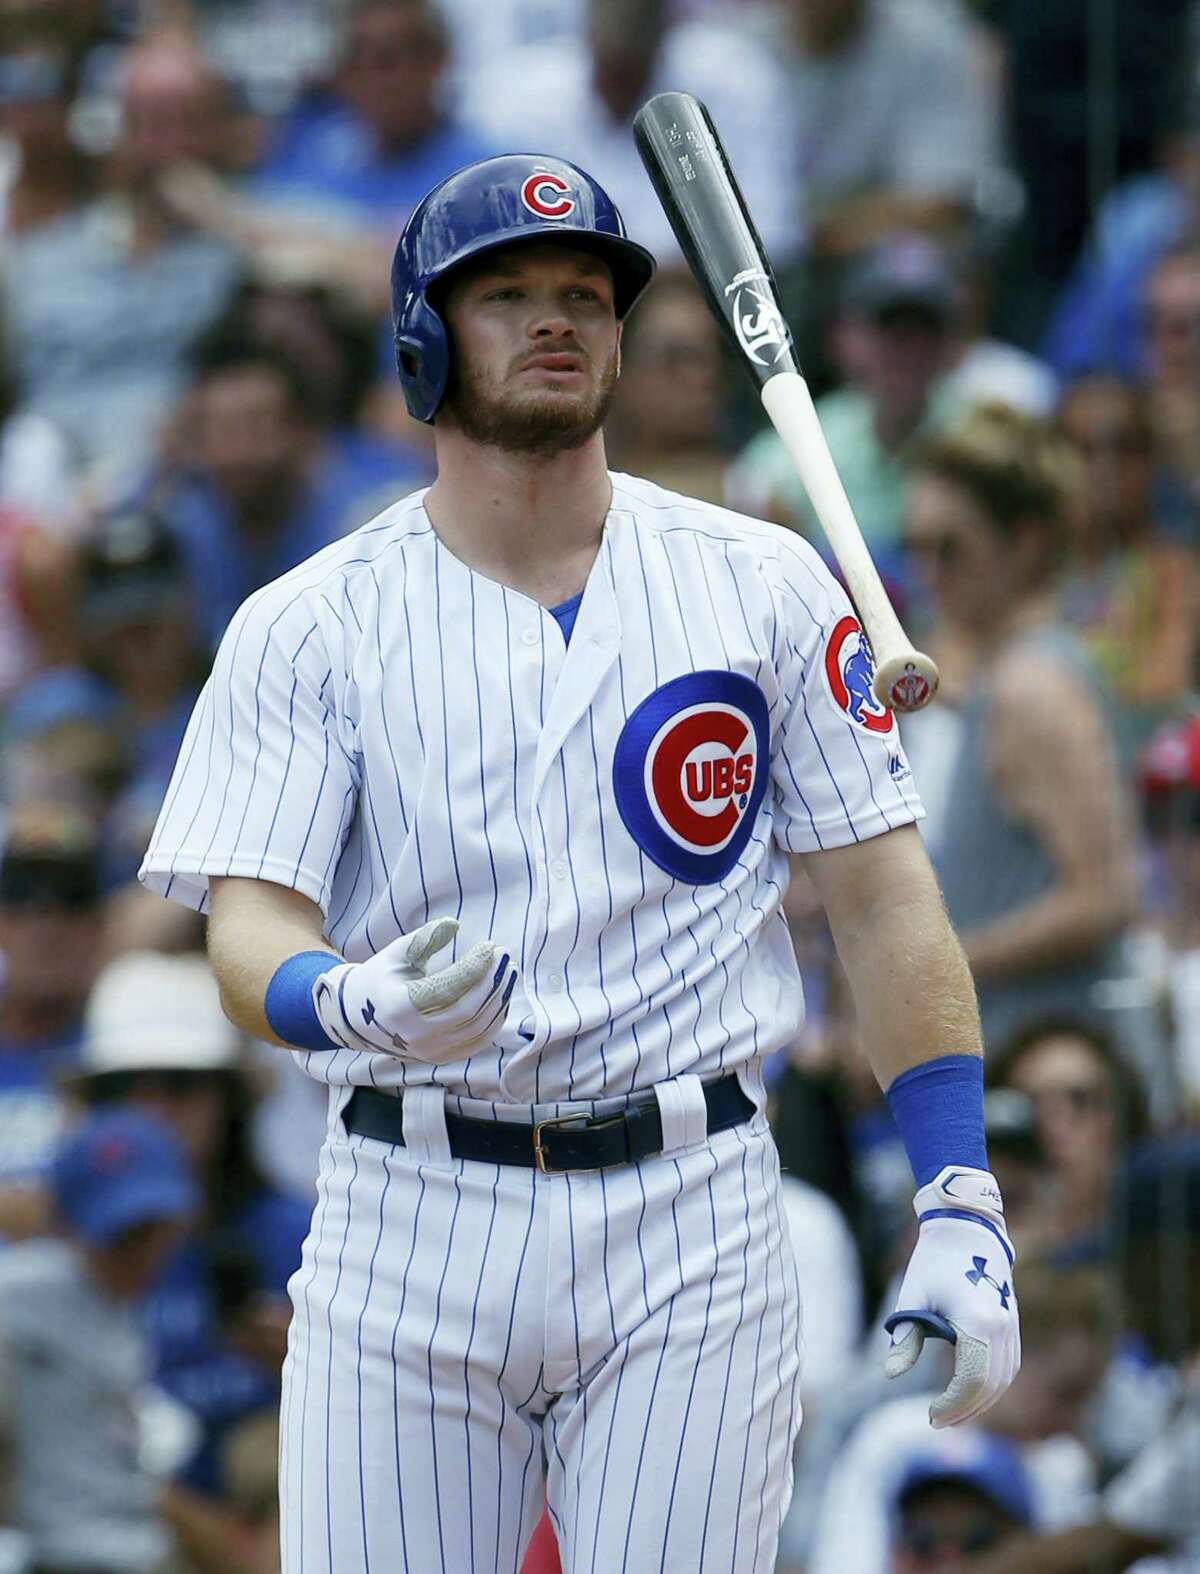 Chicago Cubs’ Ian Haps reacts as tosses his bat after being called out on strikes during the first inning of a baseball game against the Pittsburgh Pirates July 9, 2017, in Chicago.